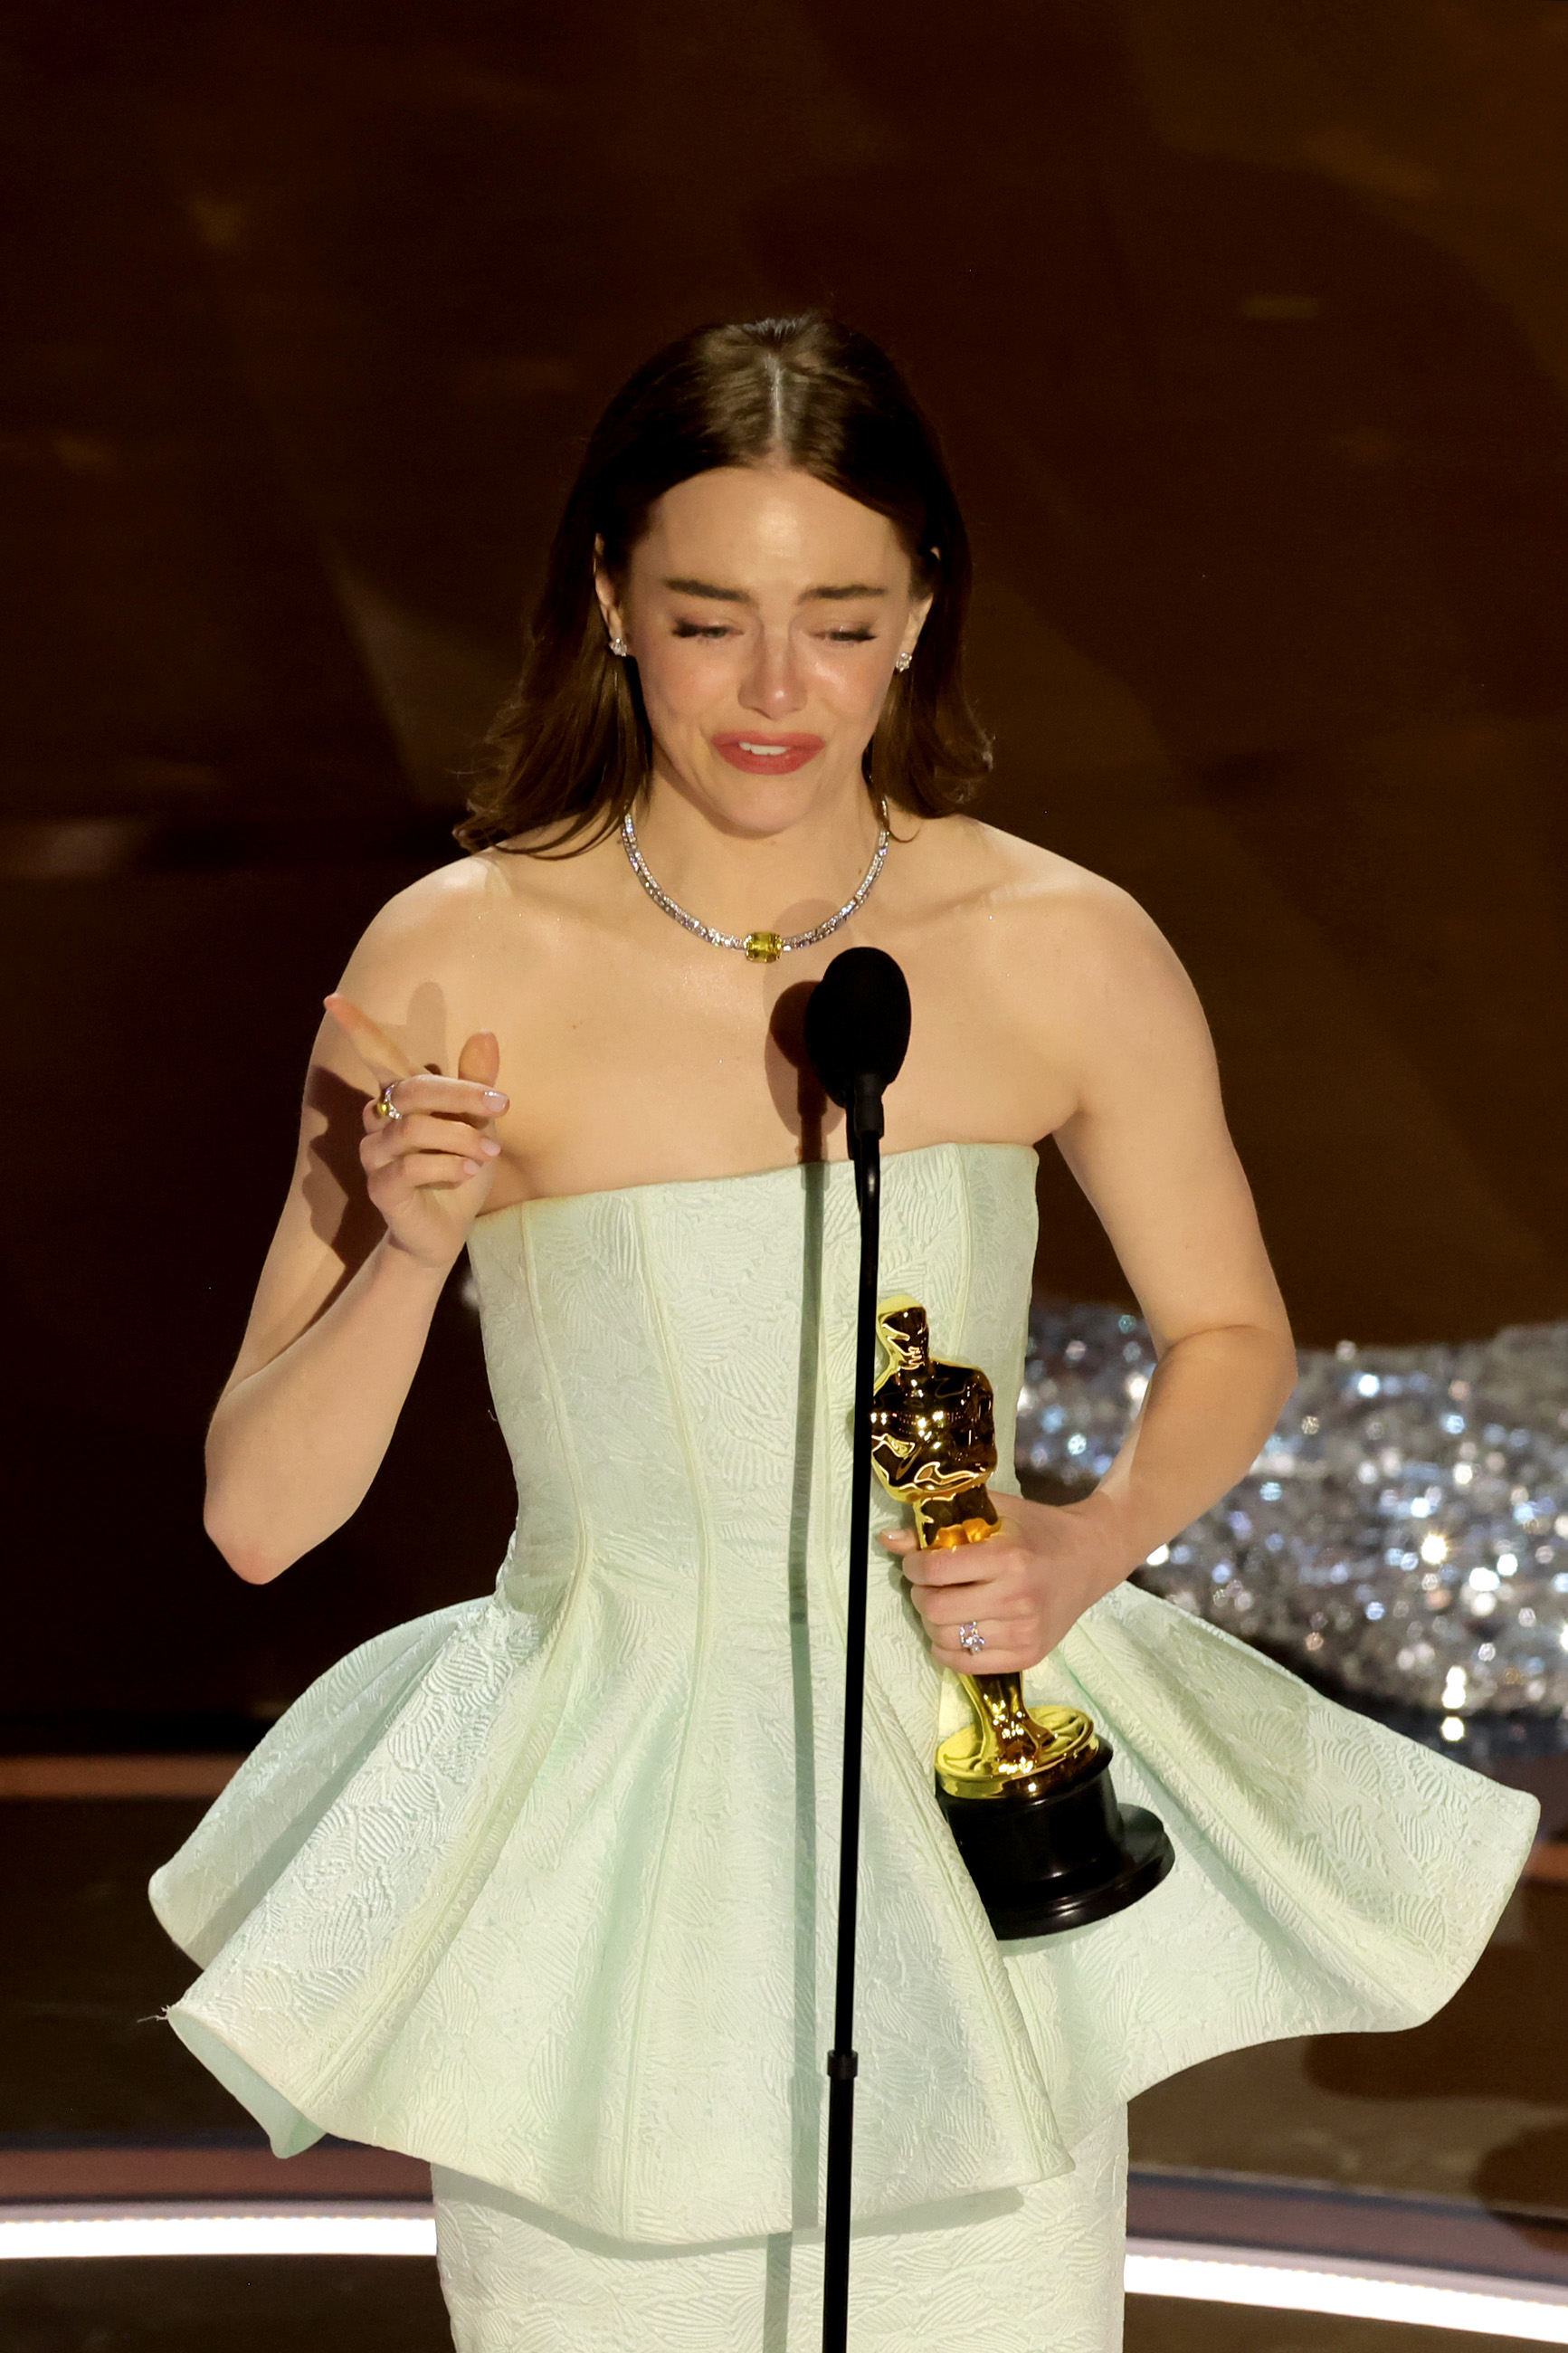 Emma Stone accepting her Oscar onstage